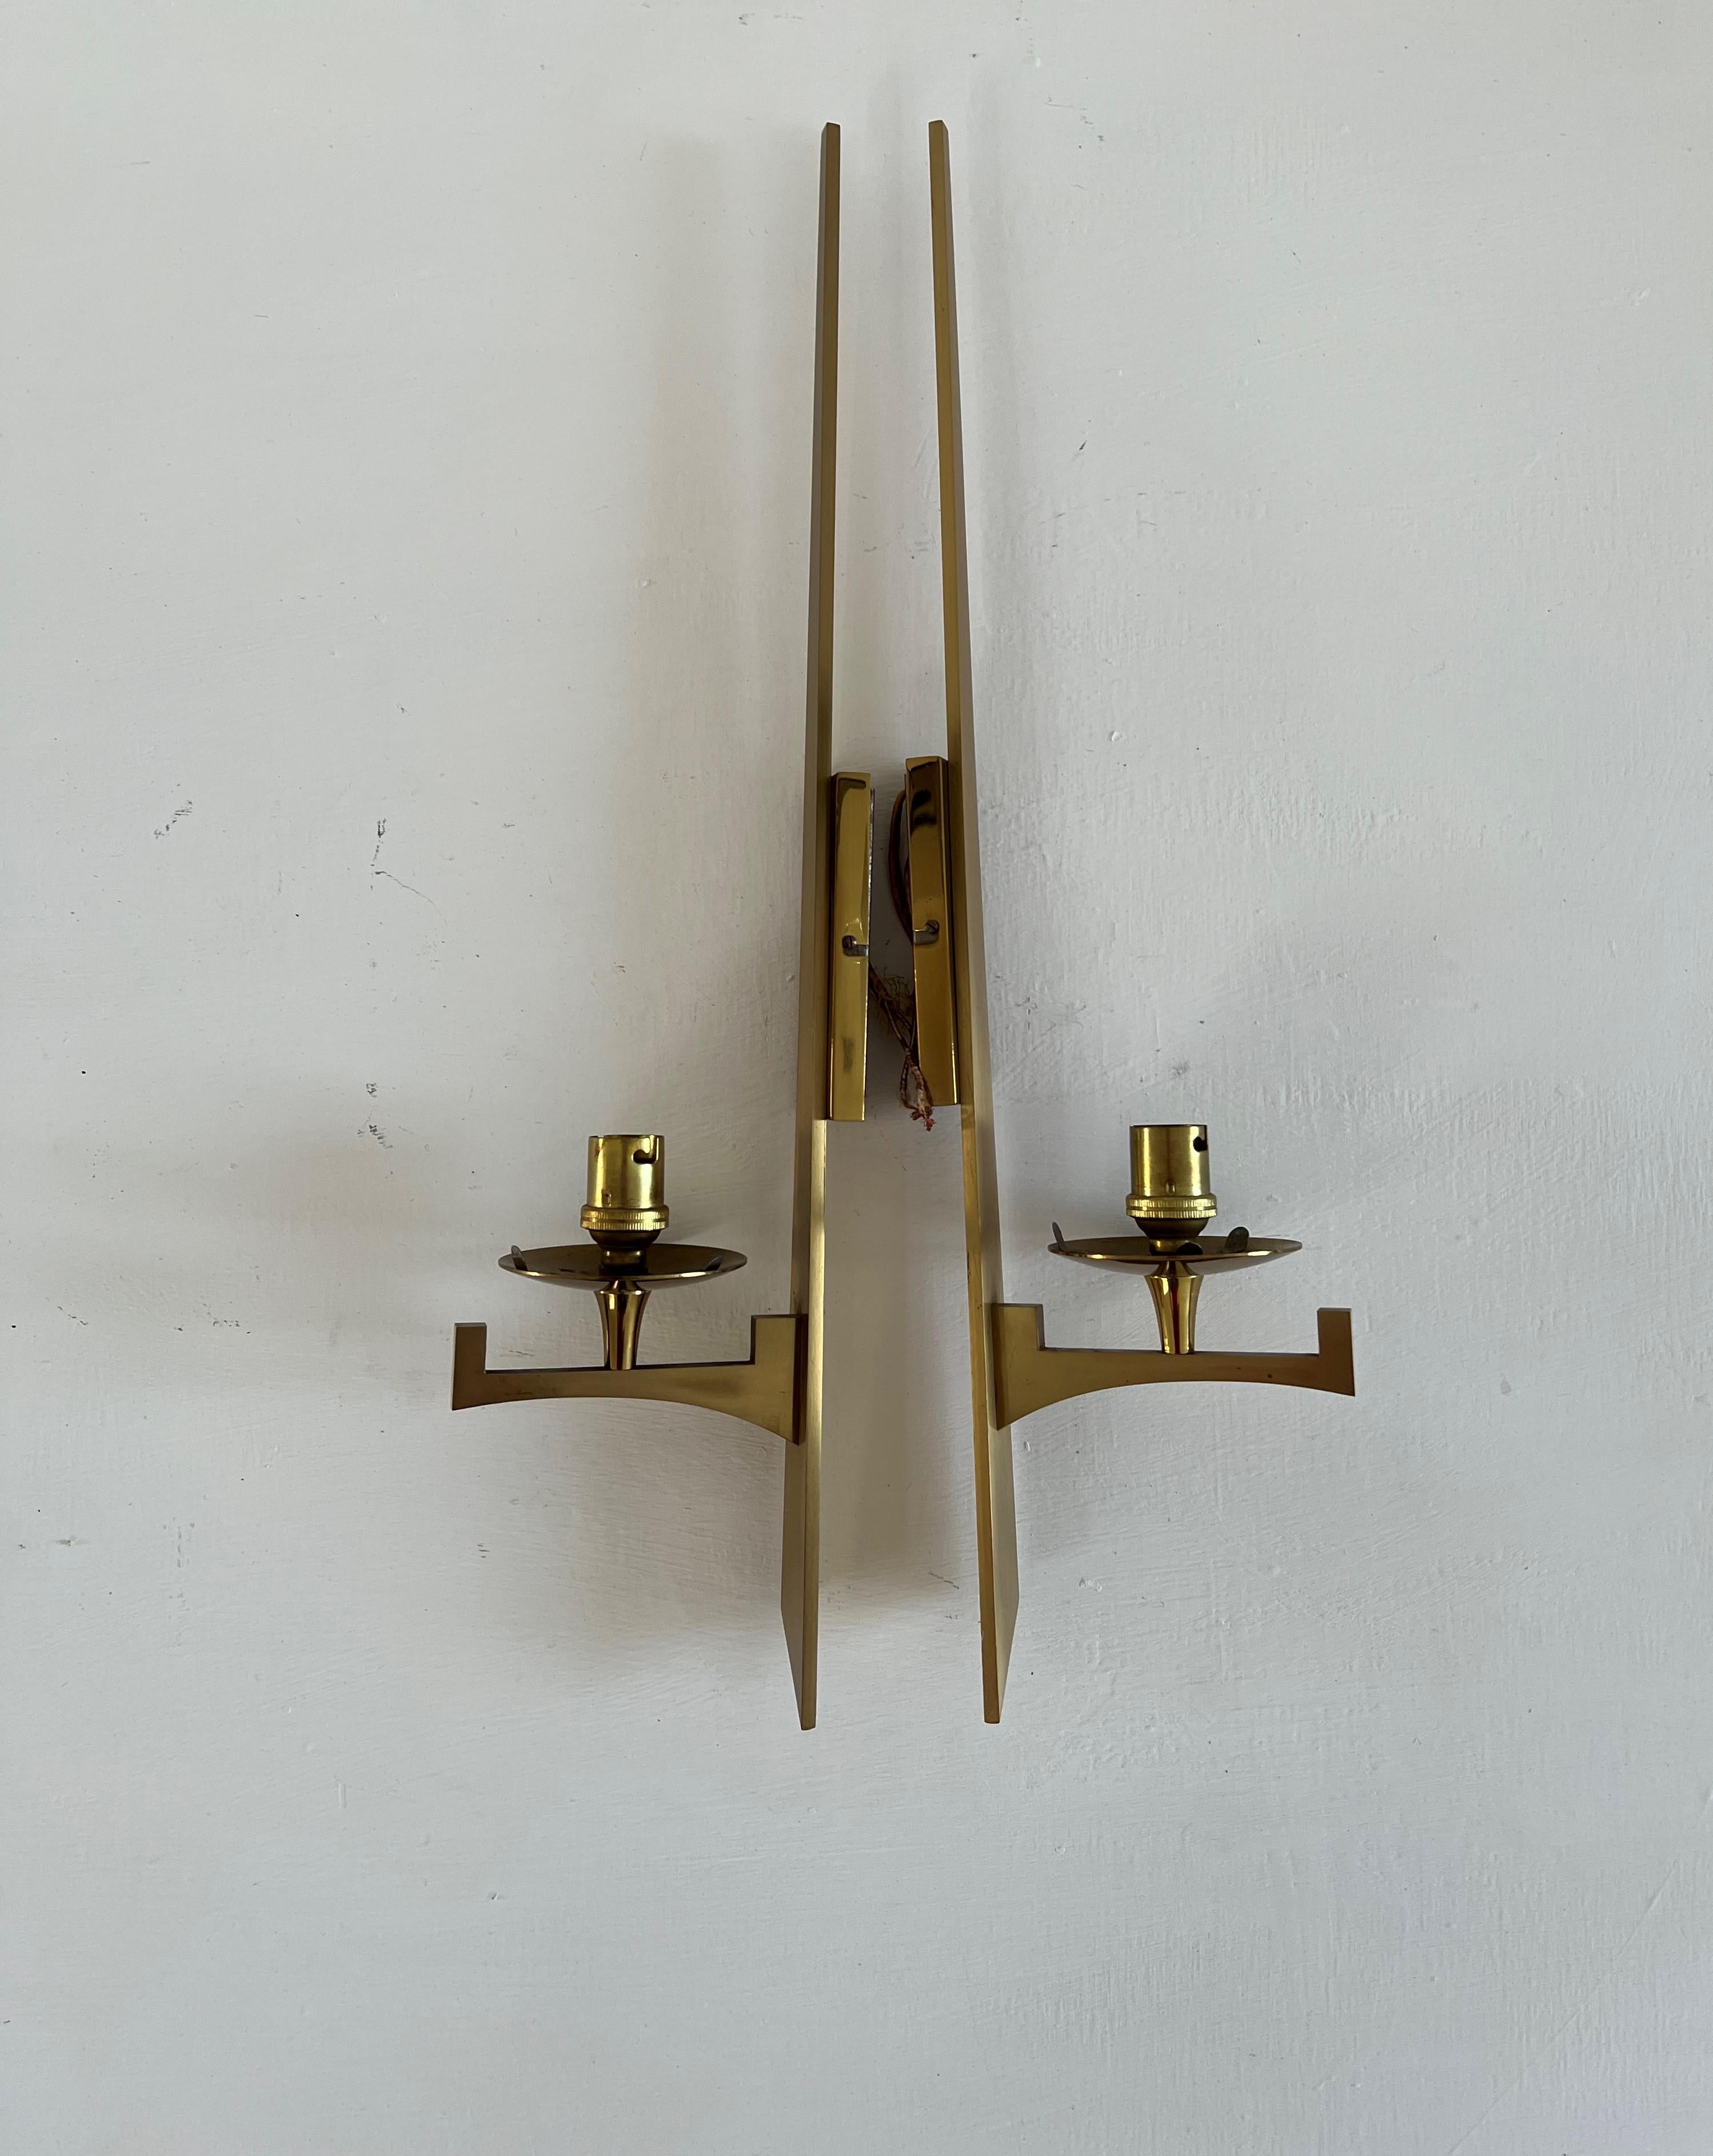 Polished Modernist Sconces Attr to Maison Arlus in Brass and Opaline Glass, France, 1950s